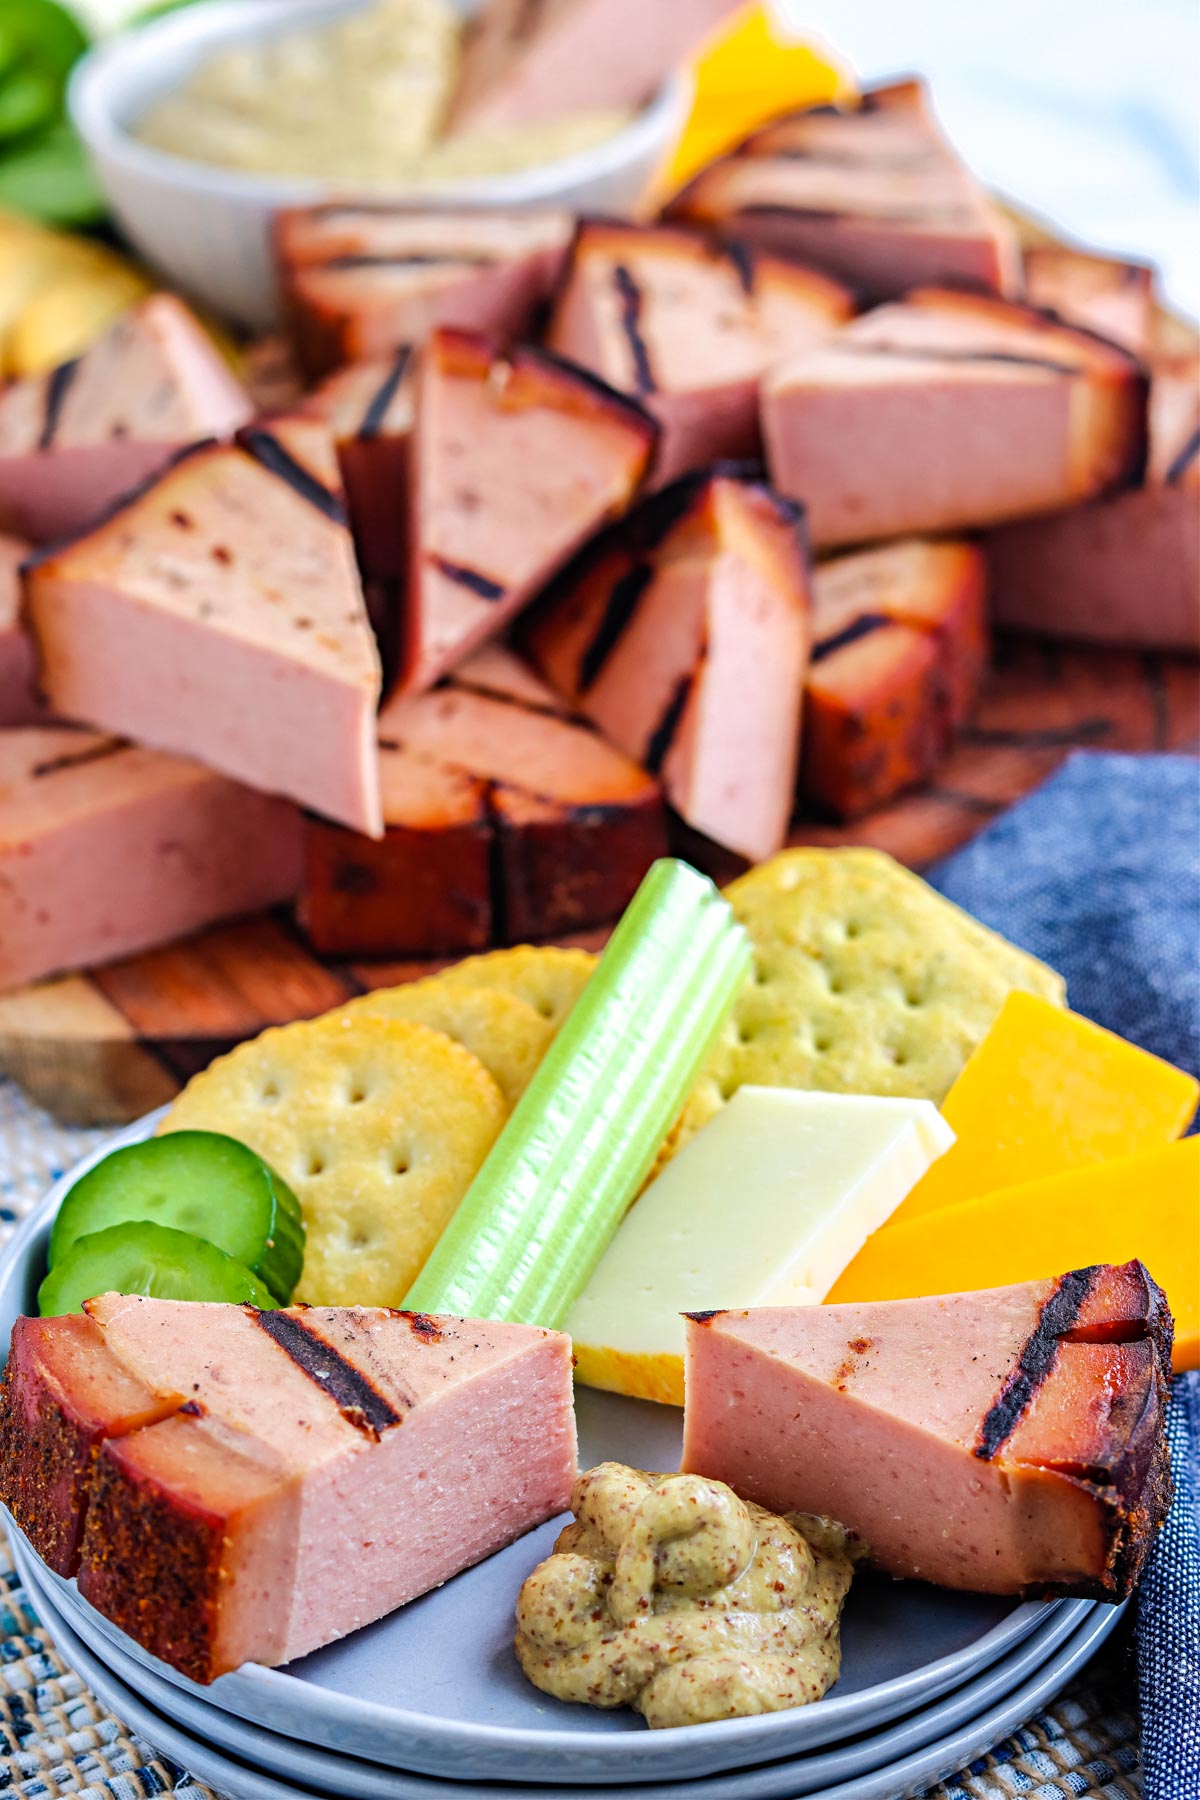 Pieces of the Smoked Bologna Chub on a plate with meat, cheese, crackers, and mustard.